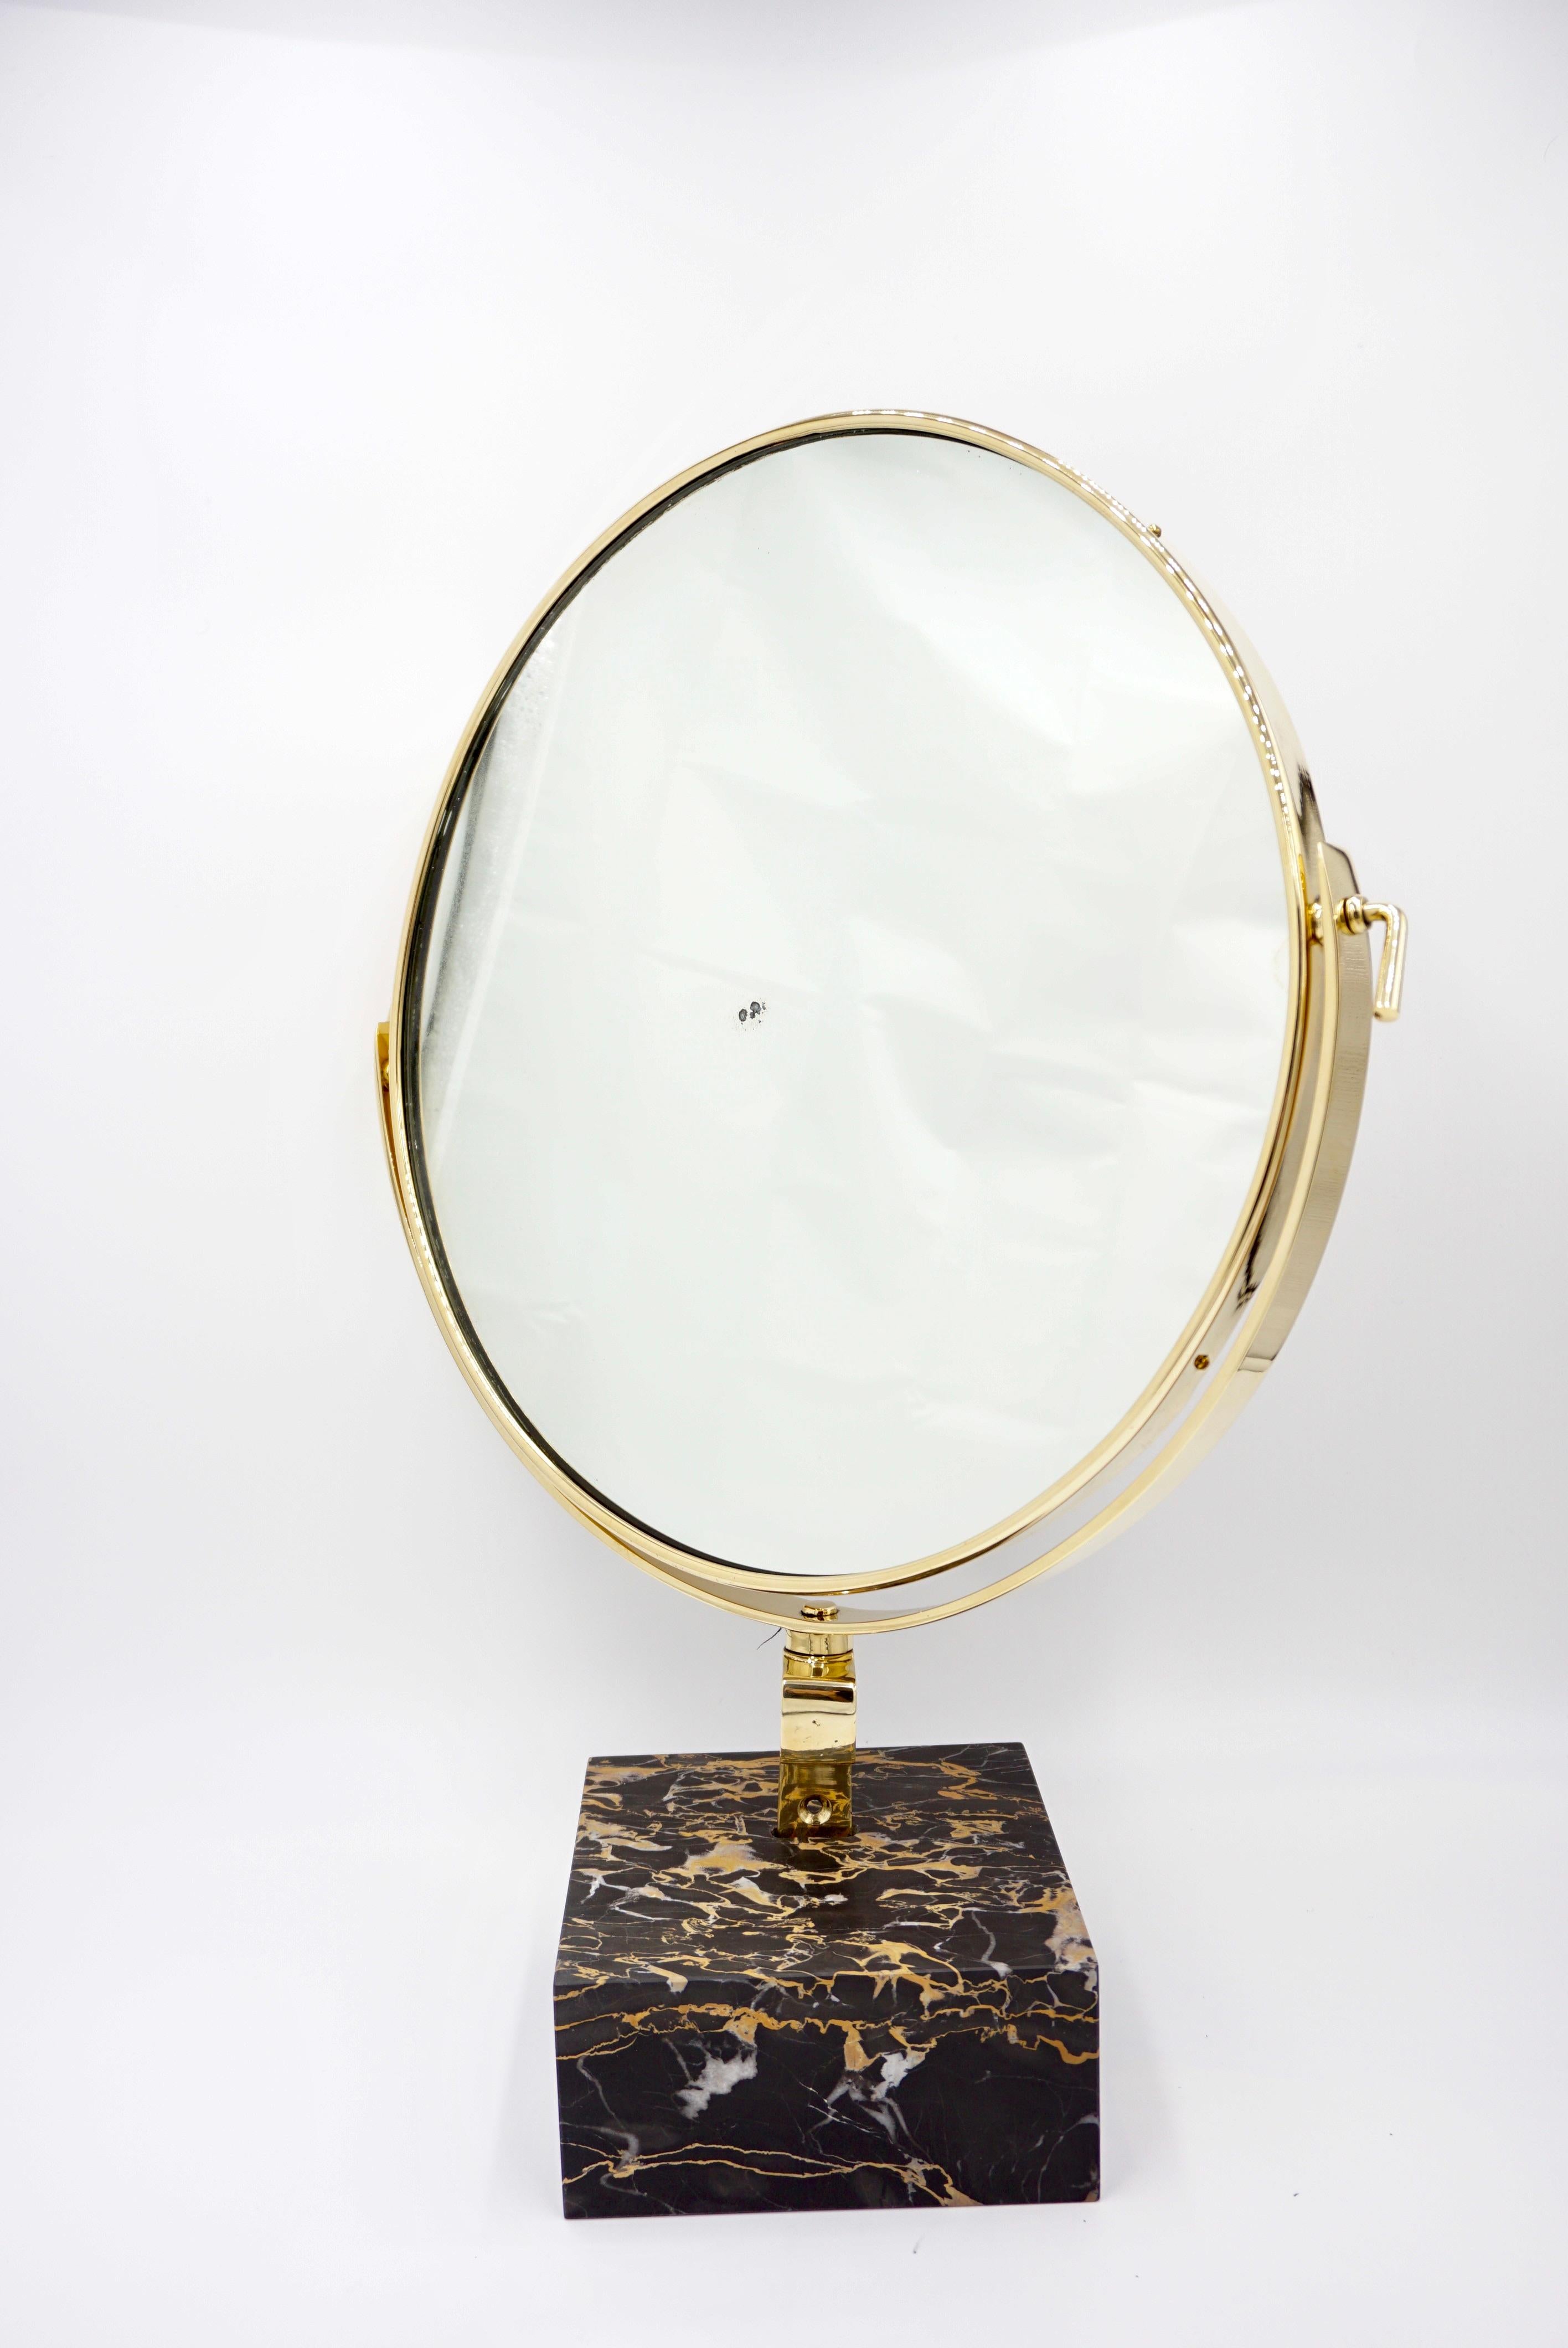 Vanity mirror designed by Gio Ponti for the vanity of Hotel Royal, Napoli, 1955 and produced by Fontana Arte in 1955. 
limited edition
Original piece ( in one desk from the furniture of Hotel Royal) customized by CG with marble support in 2021.